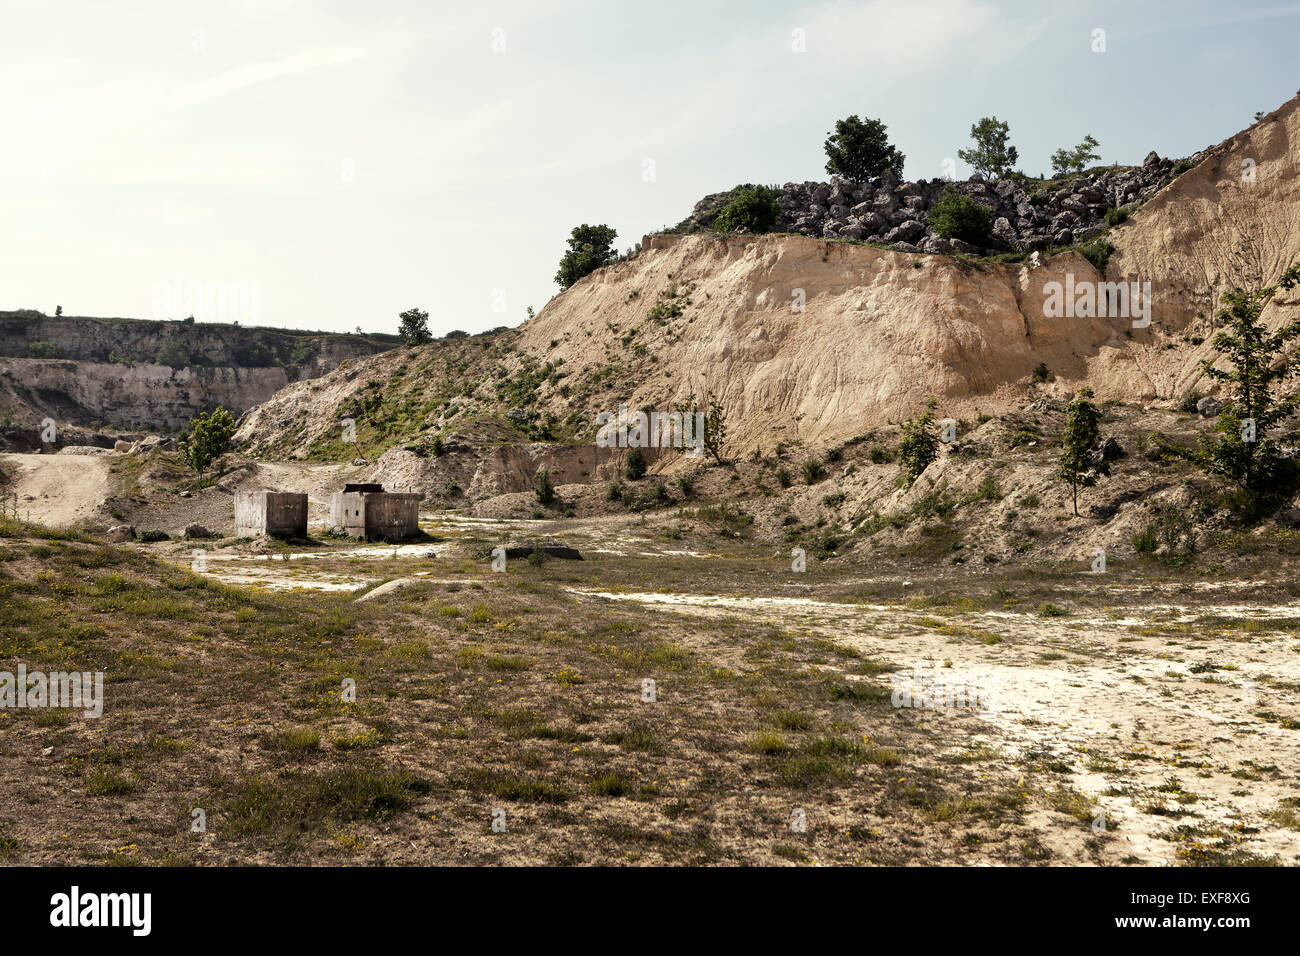 Abandoned quarry with dirt track and concrete blocks Stock Photo